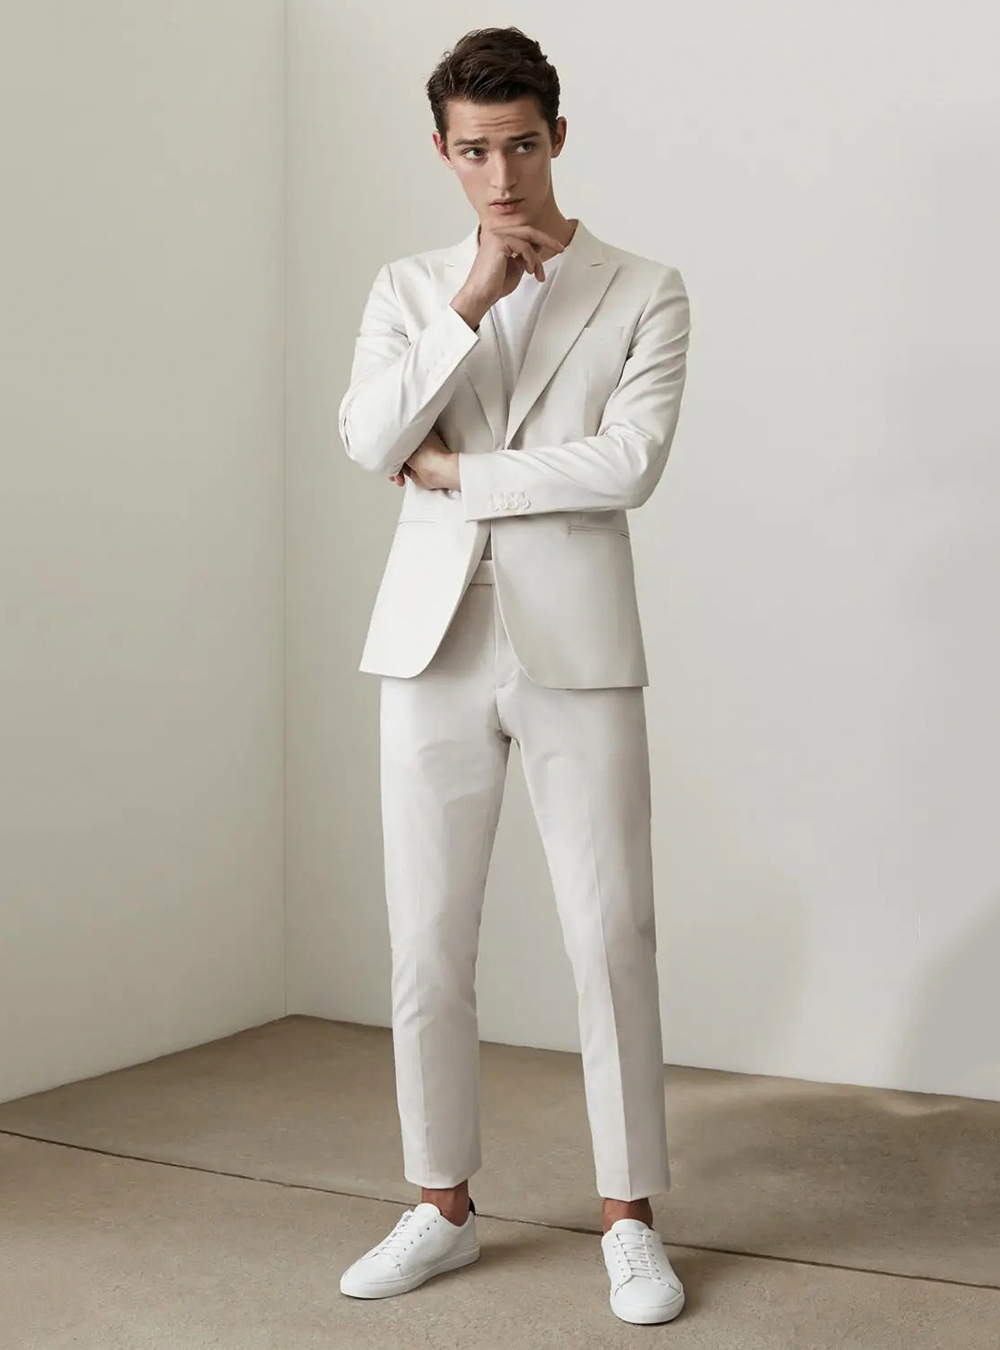 off-white casual suit, white t-shirt, and white sneakers